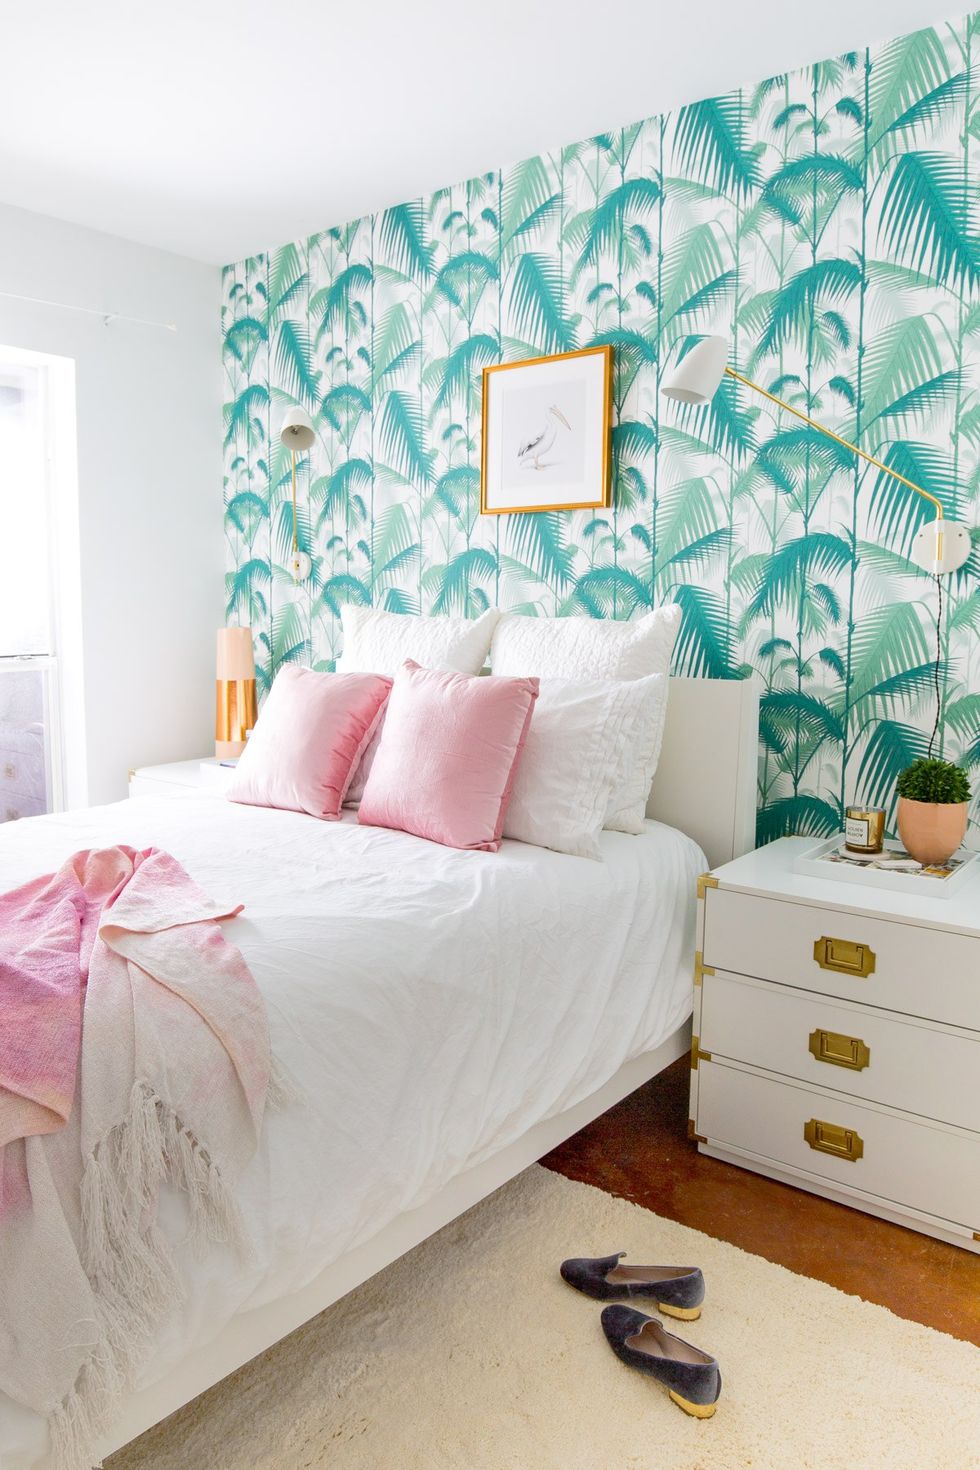 10 Wallpapers That Will Transform Your Bedroom in the Blink of an Eye